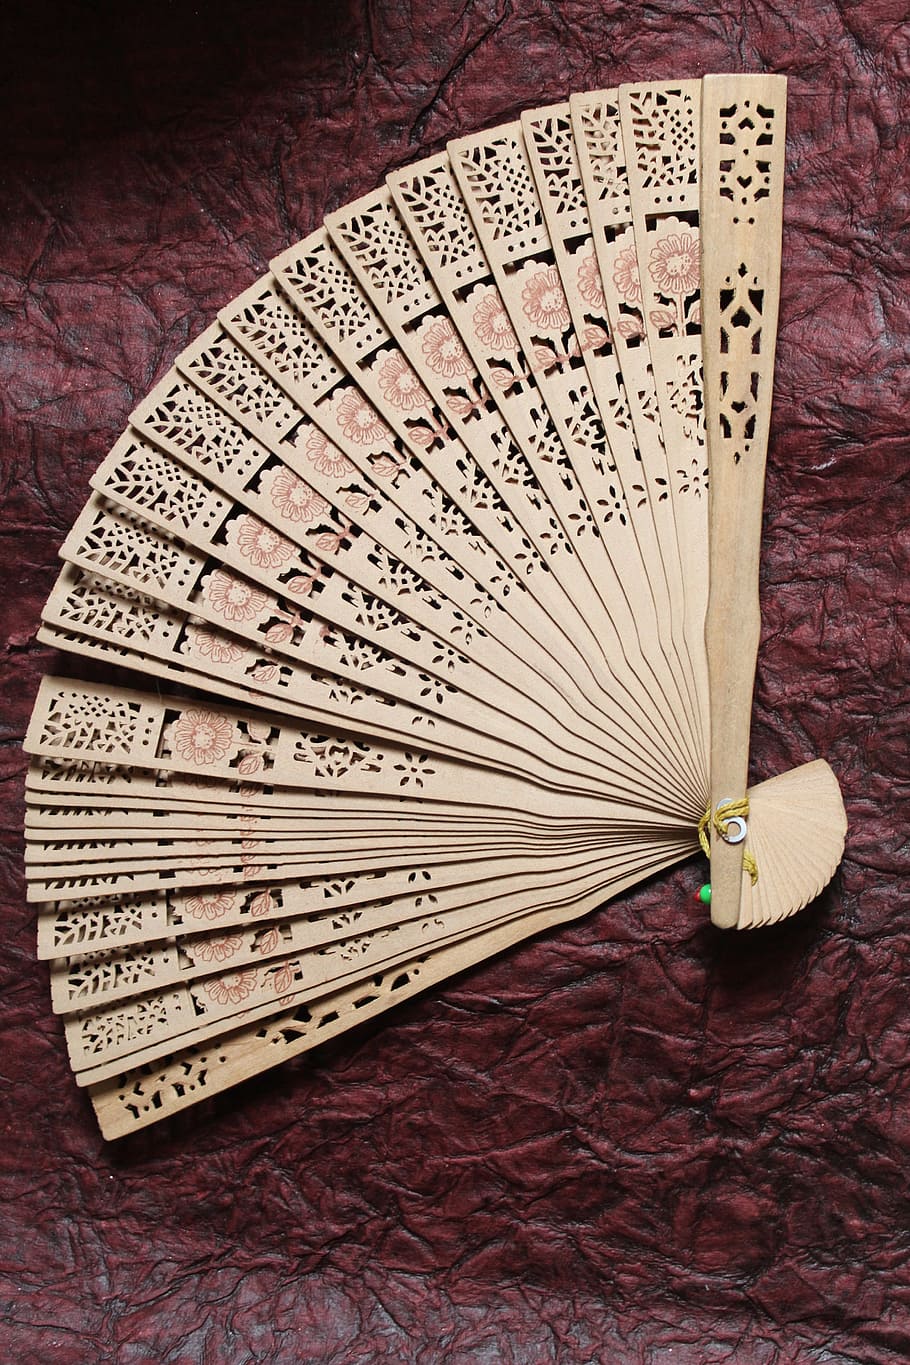 Hand, Fan, Chinese, Japanese, Japan, hand, fan, cultures, indoors, close-up, day